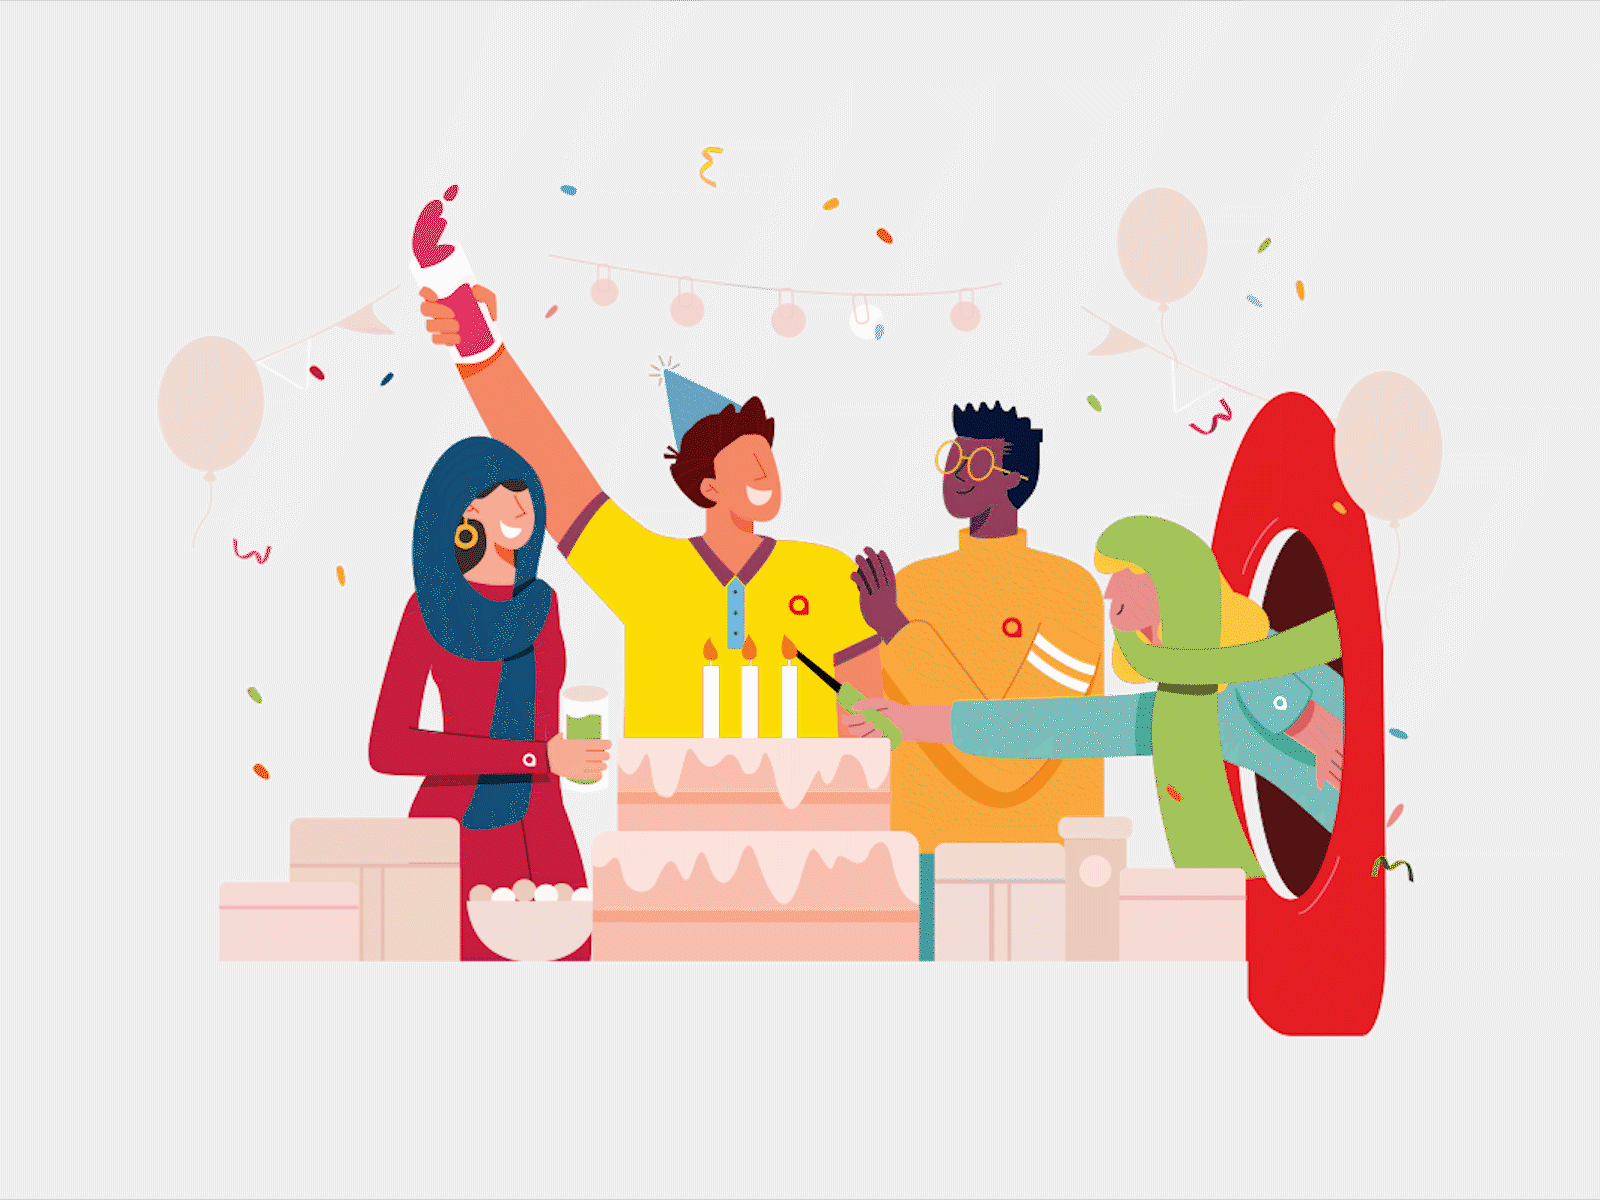 Happy Birthday Party birthday boy cake character colleague drink festival friend friends gif girl guys happy hijab illustraion lady man motion graphic party